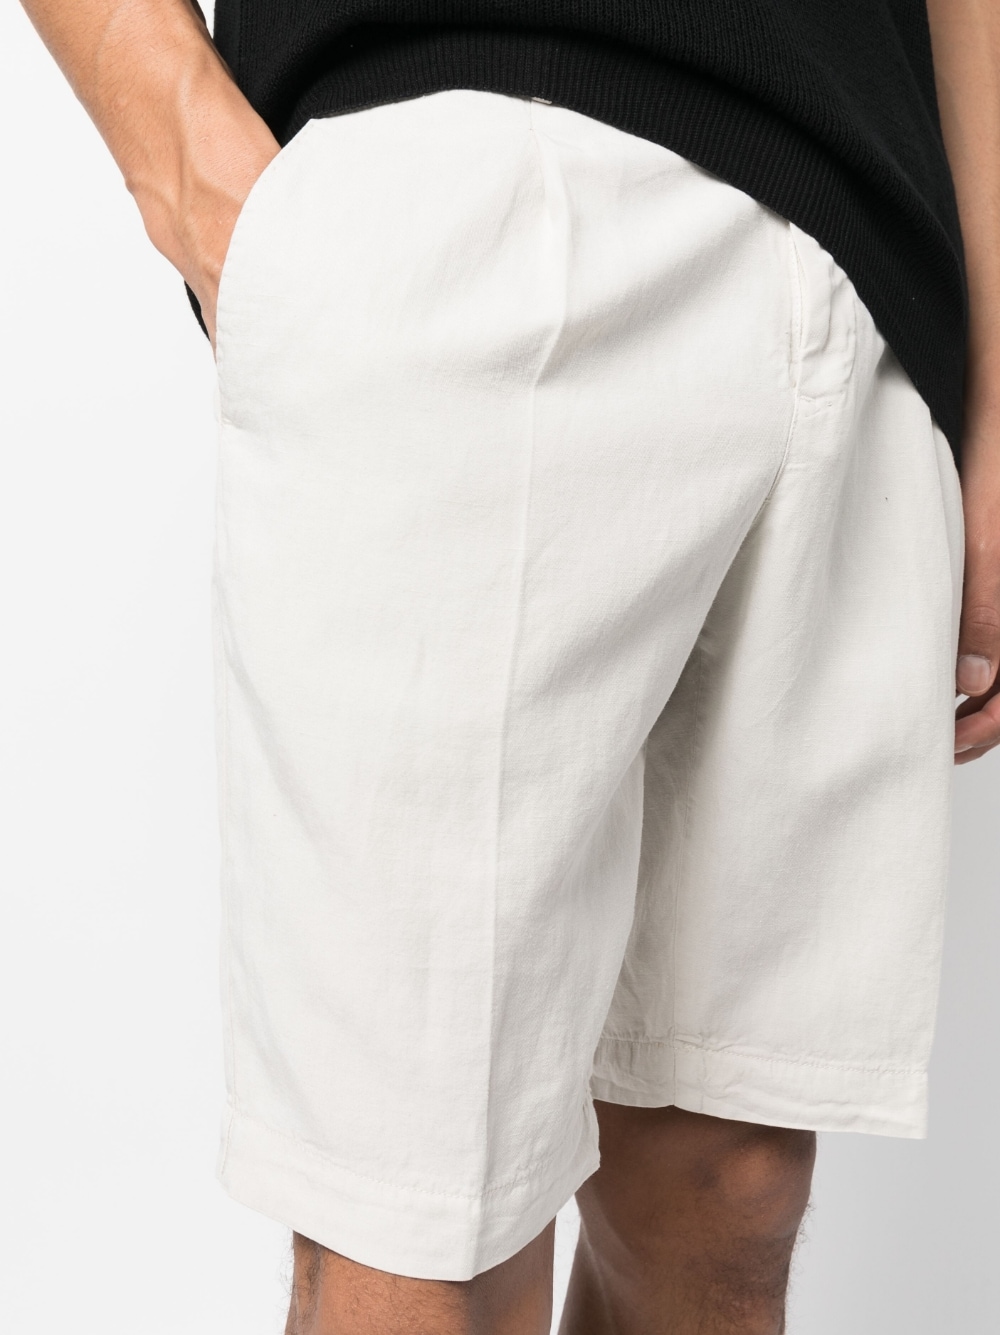 Bermuda shorts off-centre buttons